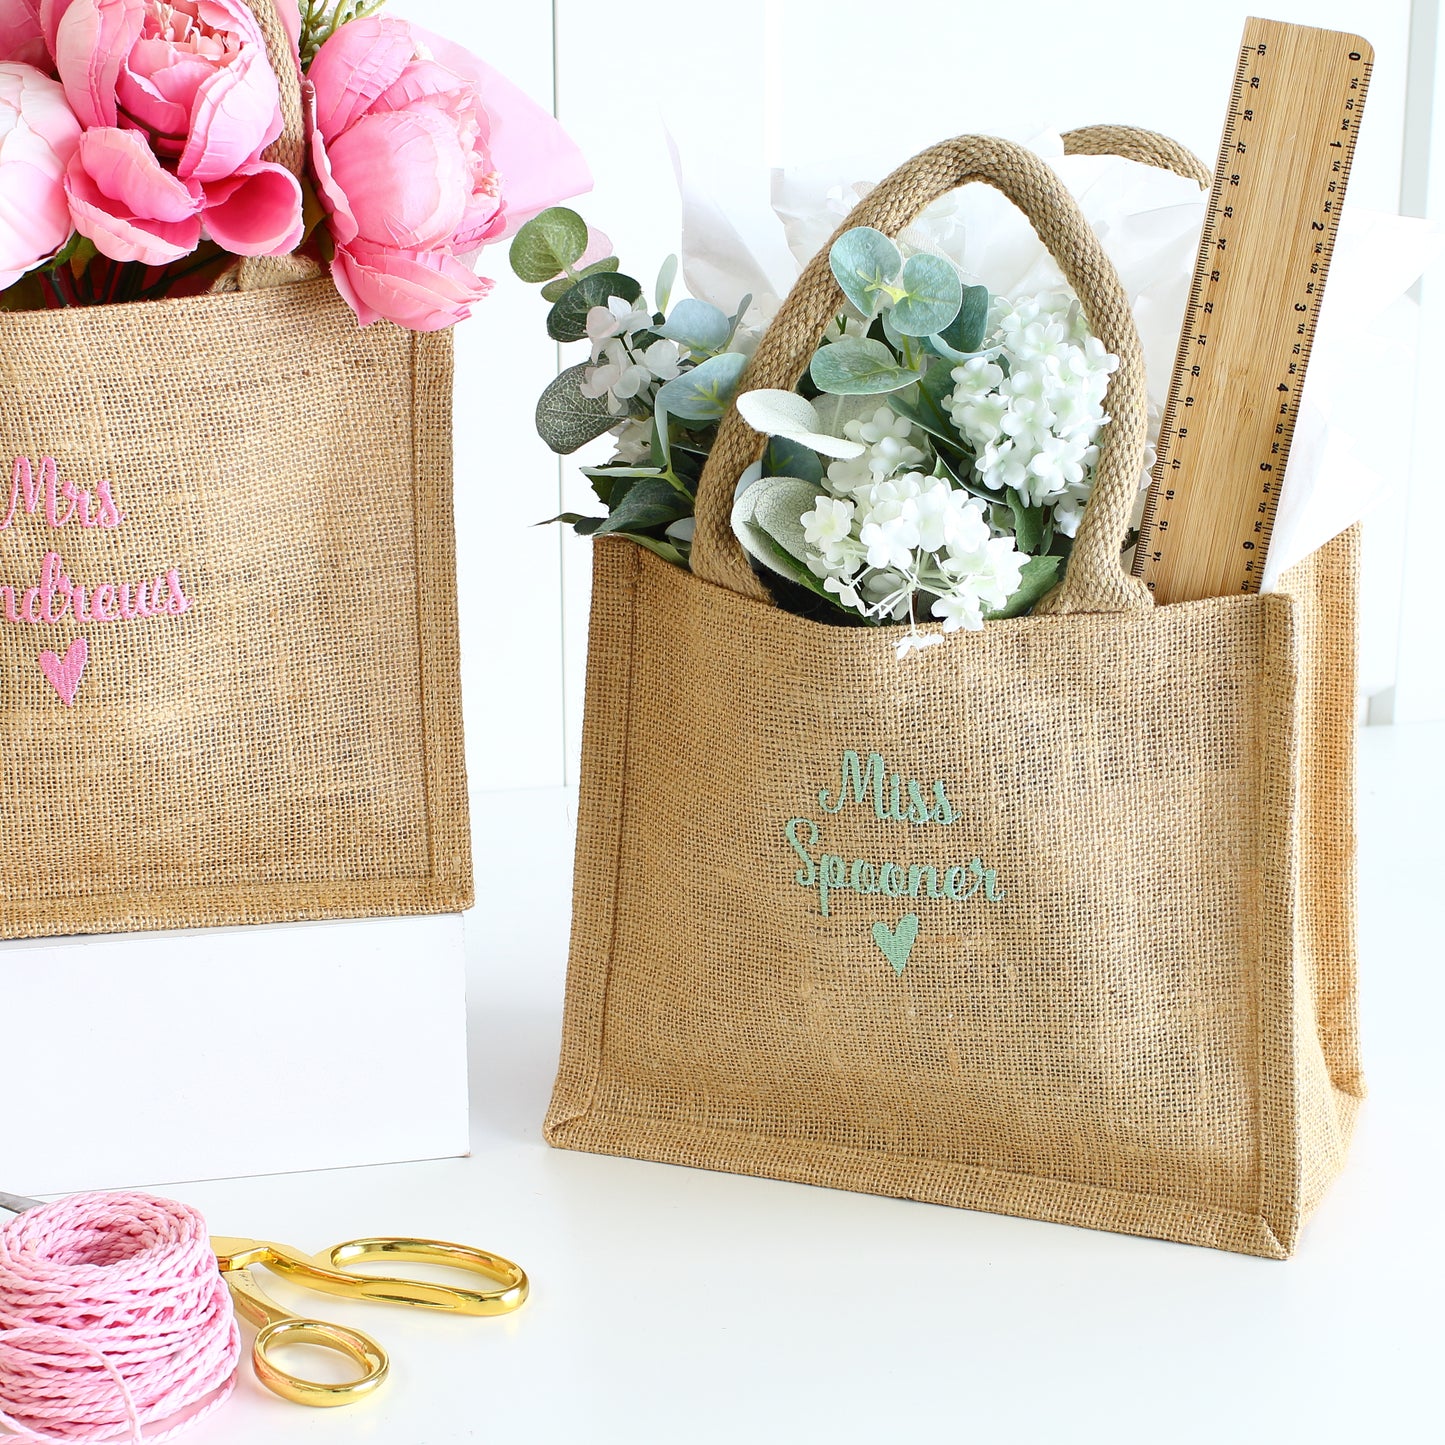 Embroidered Teacher Gift Bags (2)